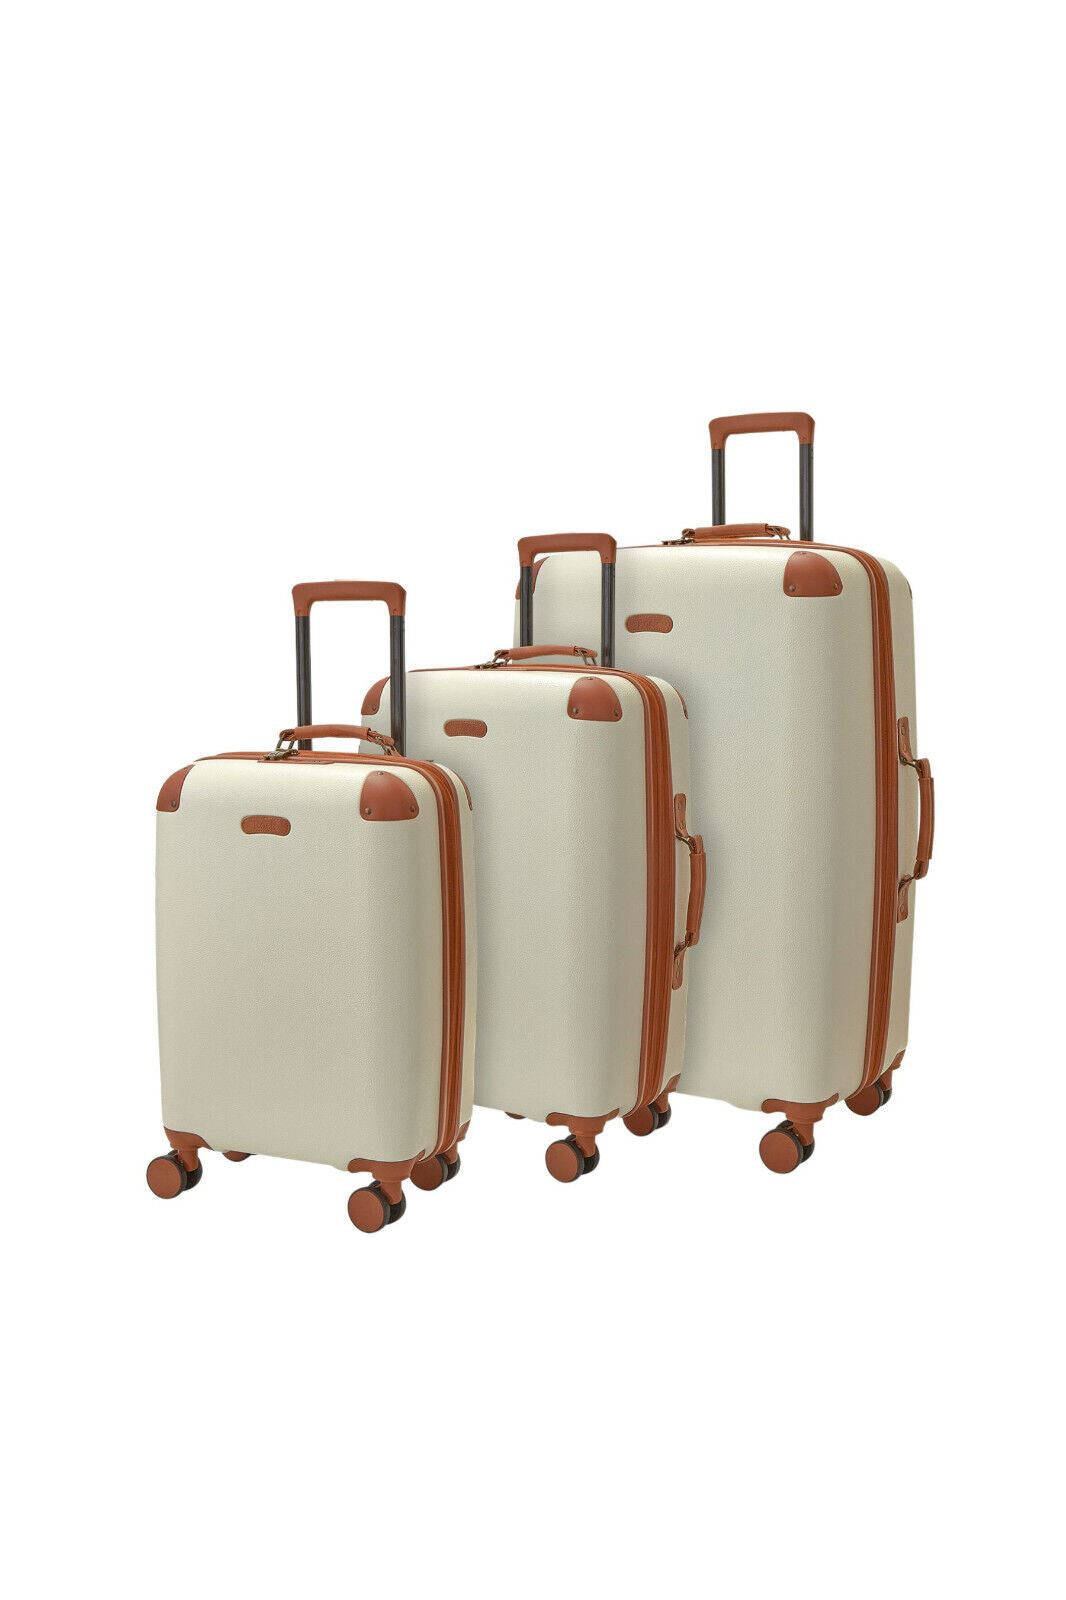 Anderson Set of 3 Hard Shell Suitcase in Cream